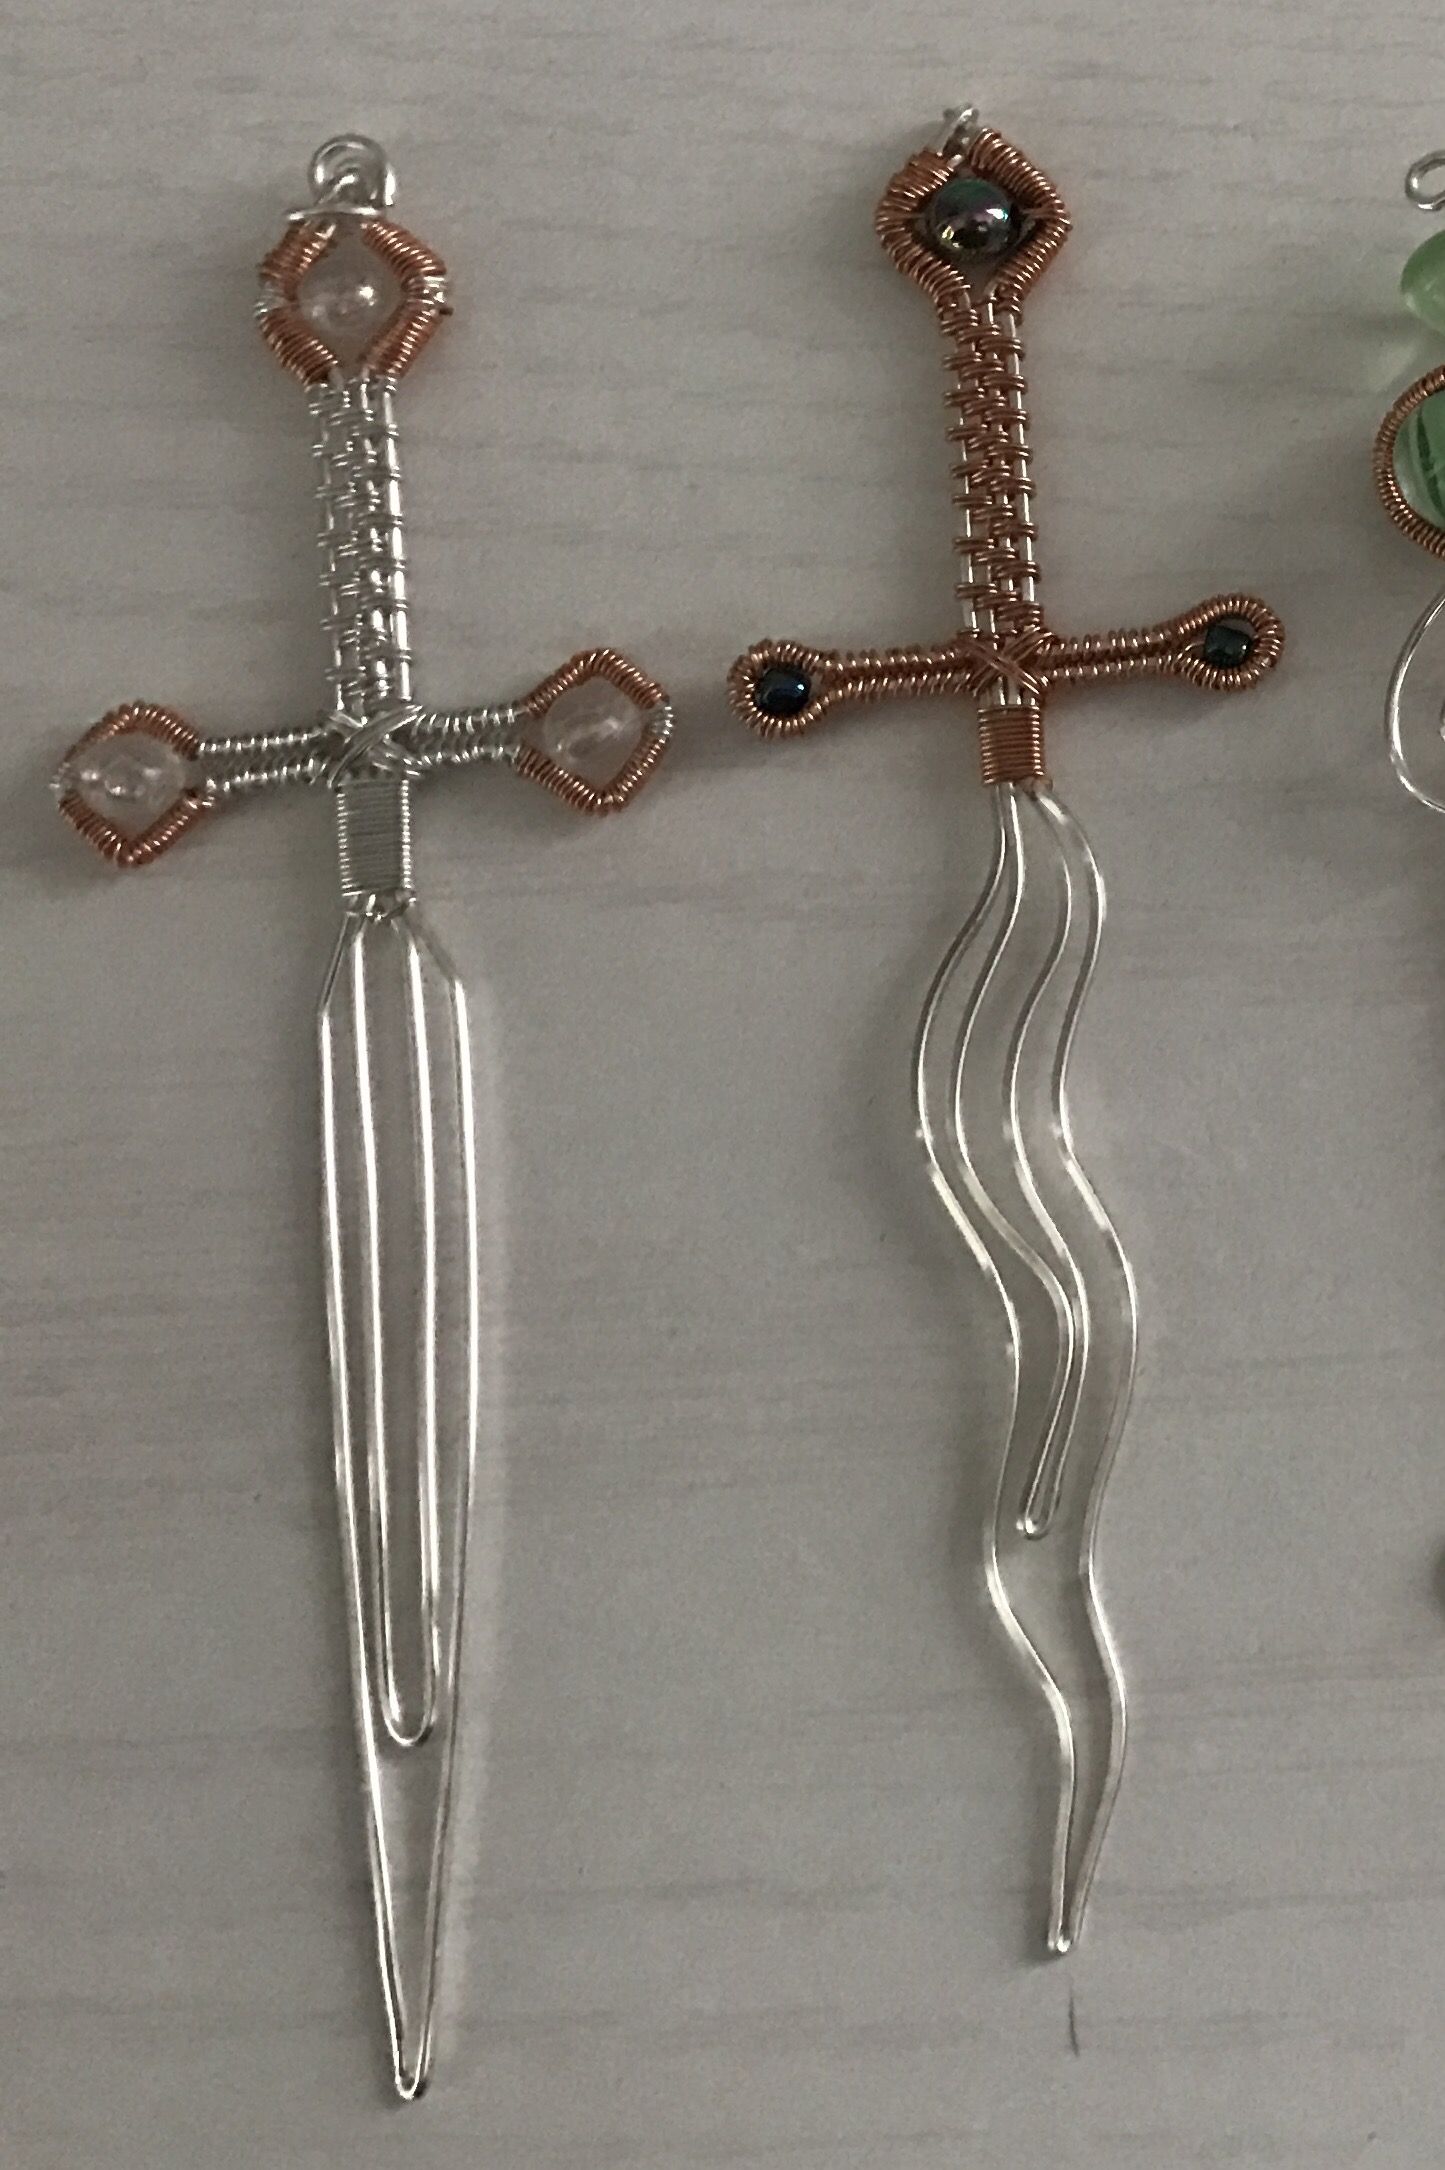 Sword bookmark wire wrap. Copper and silver plated wire. | jewelry ...